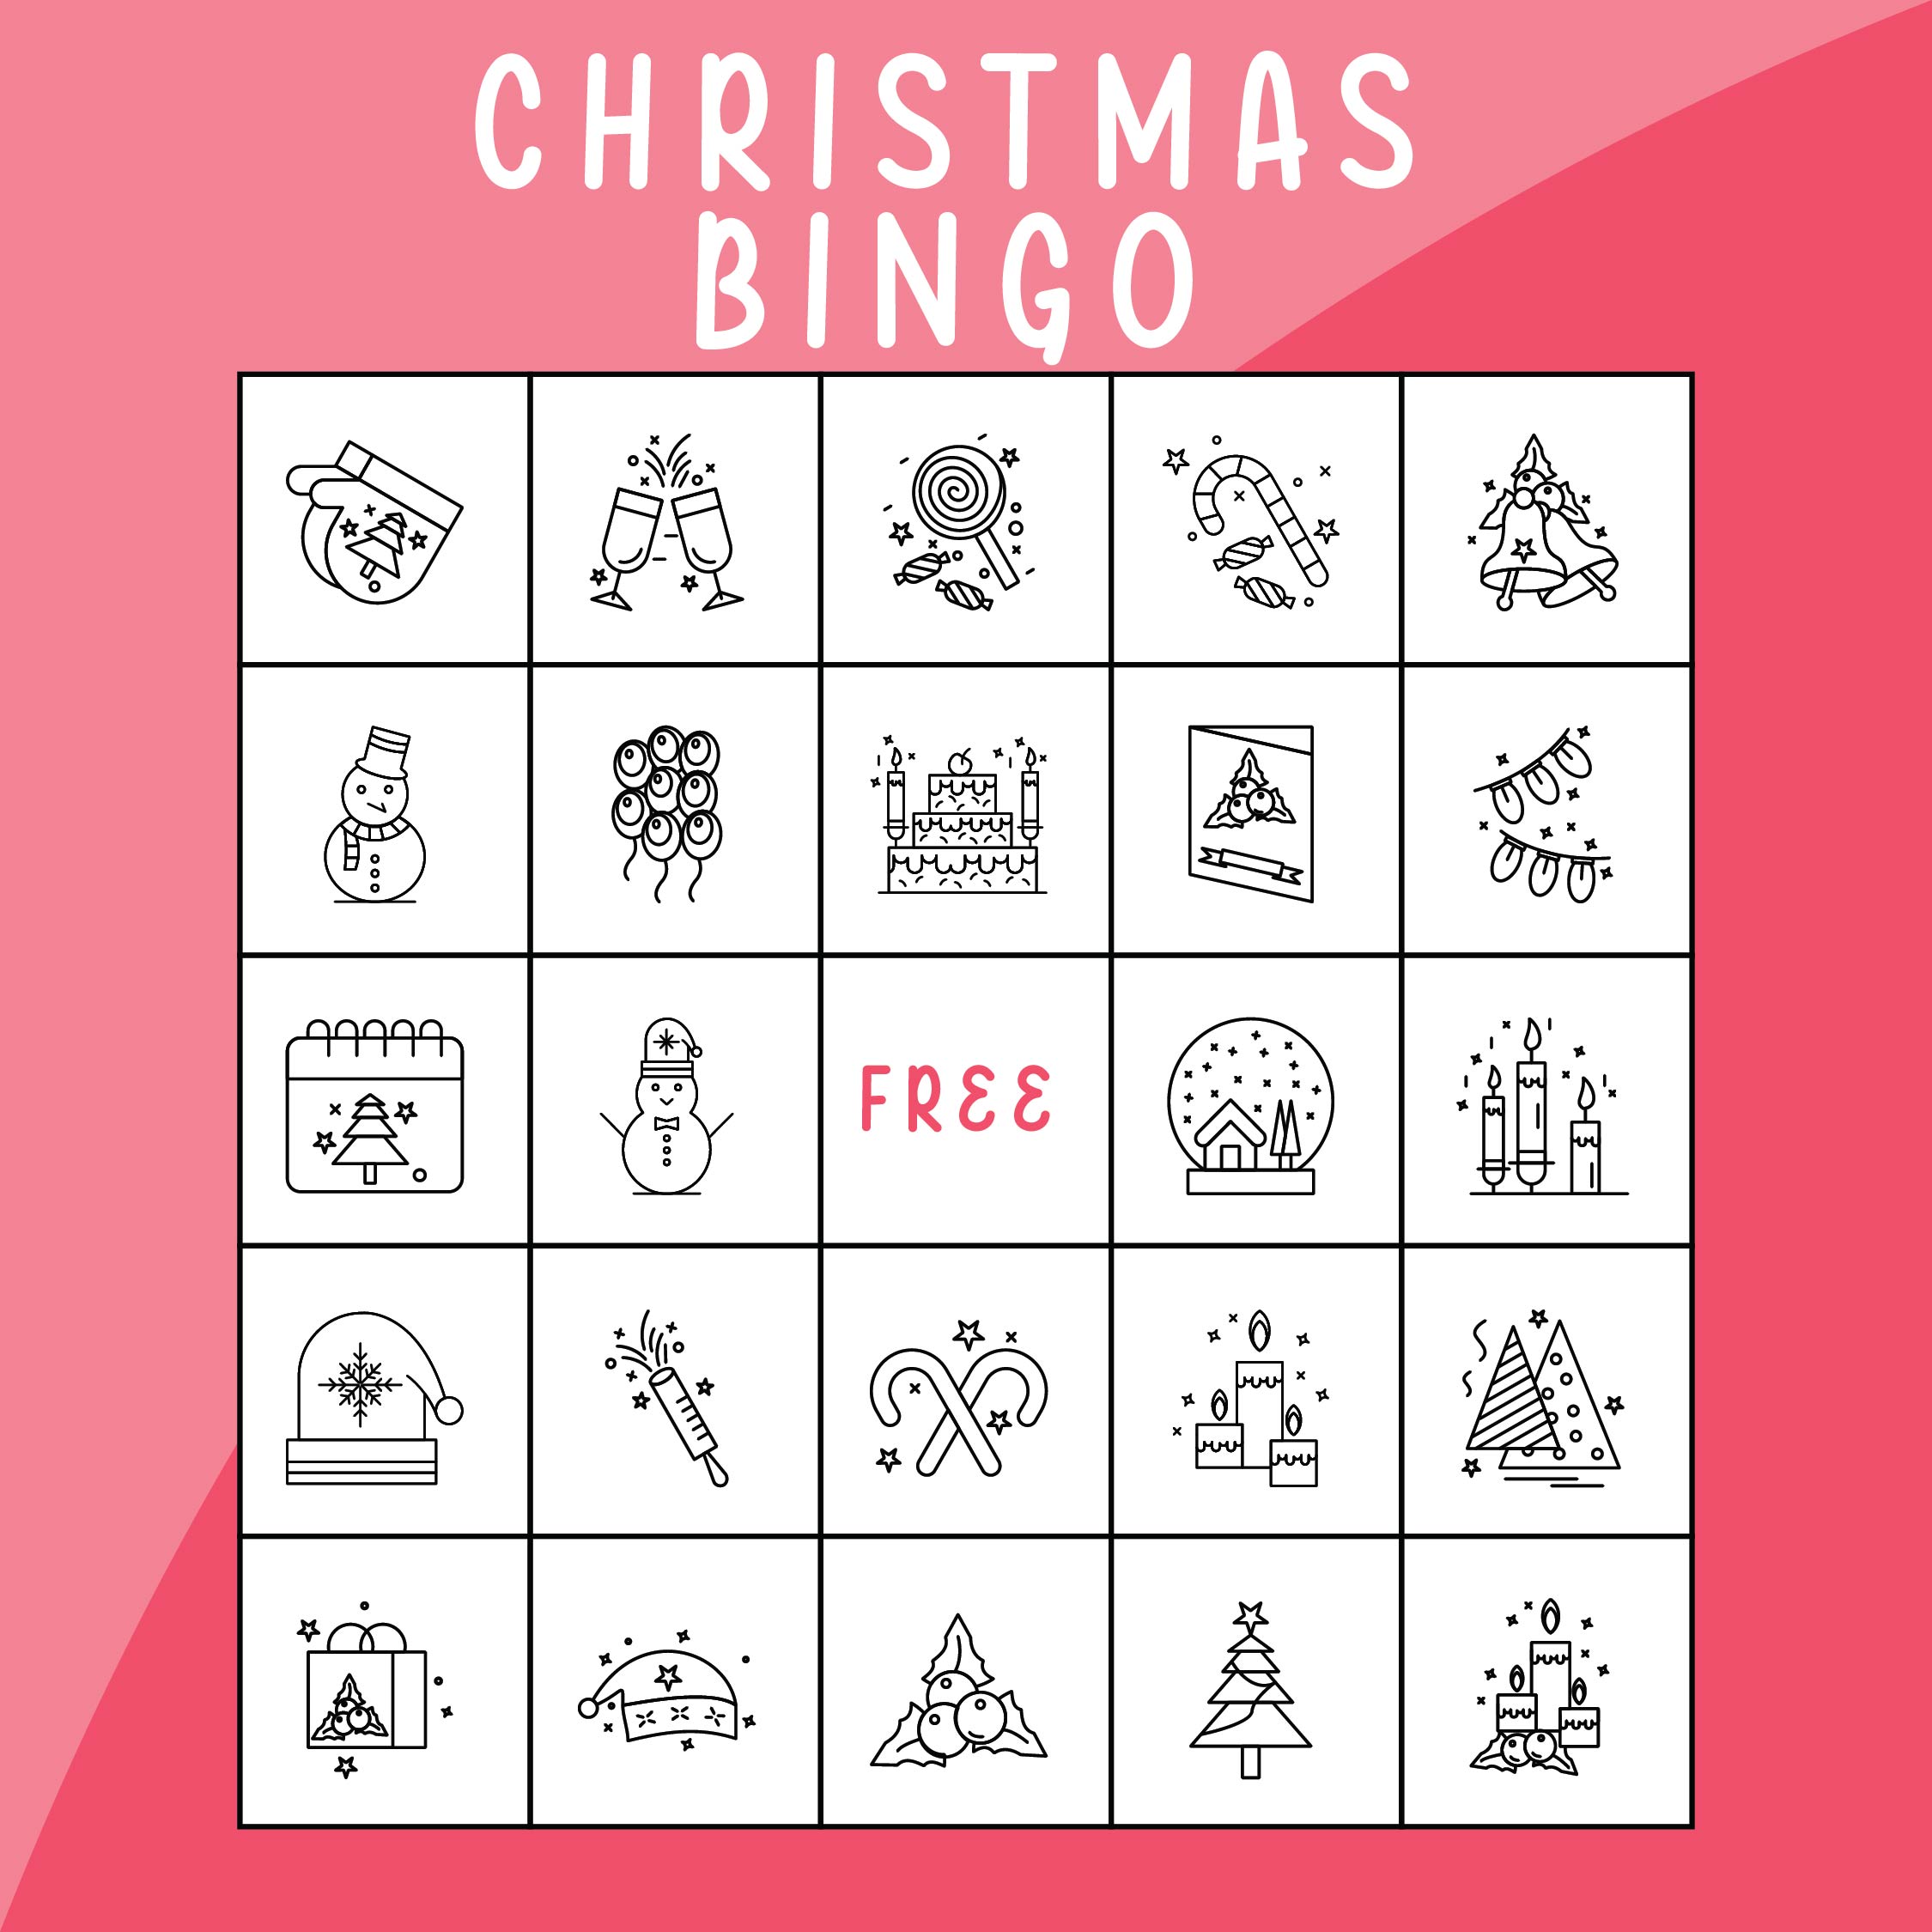 9-best-images-of-free-printable-christian-christmas-bingo-cards-free